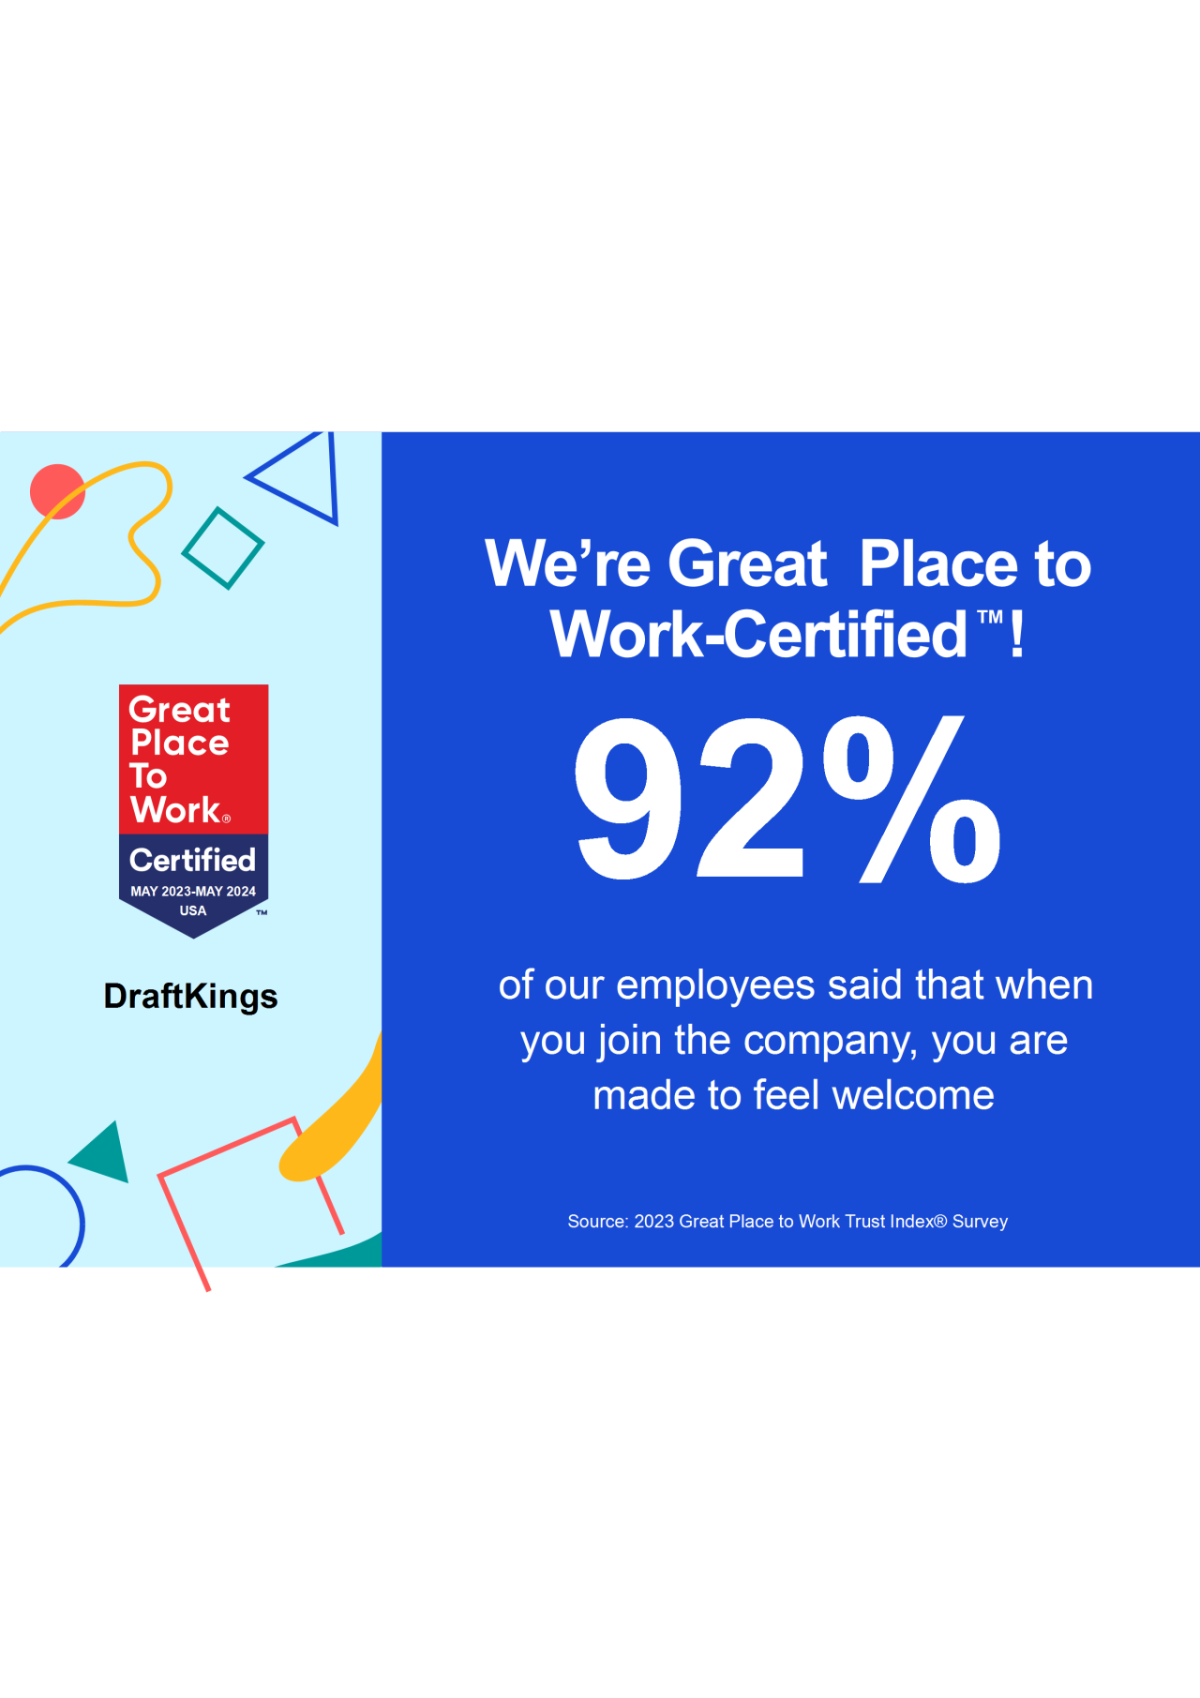 Great place to work logo with data